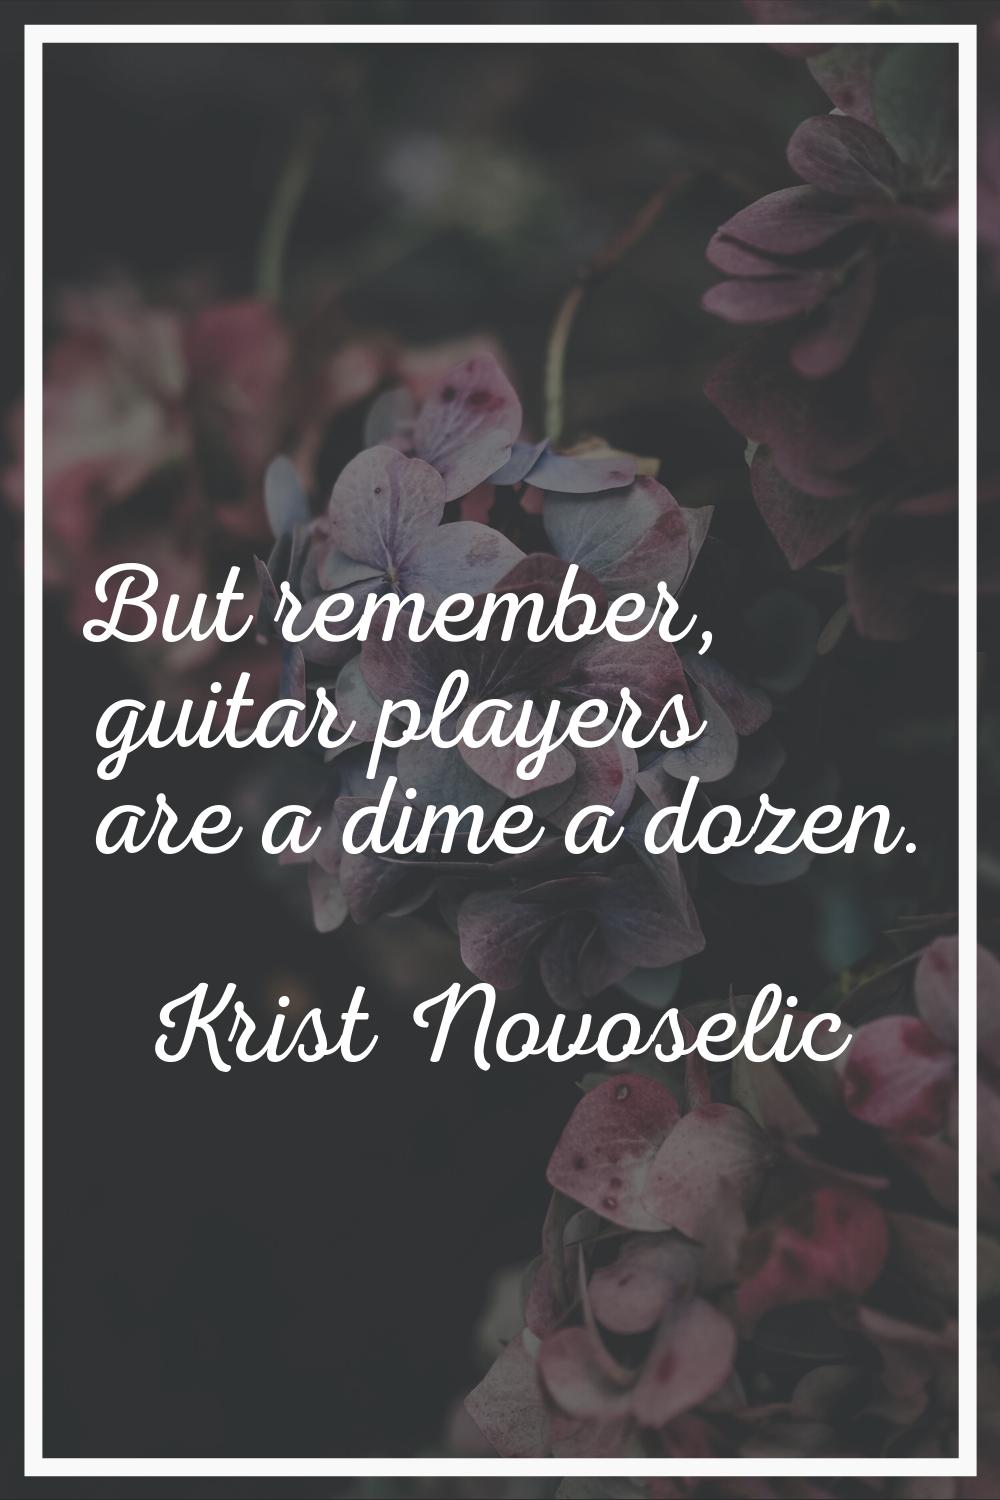 But remember, guitar players are a dime a dozen.